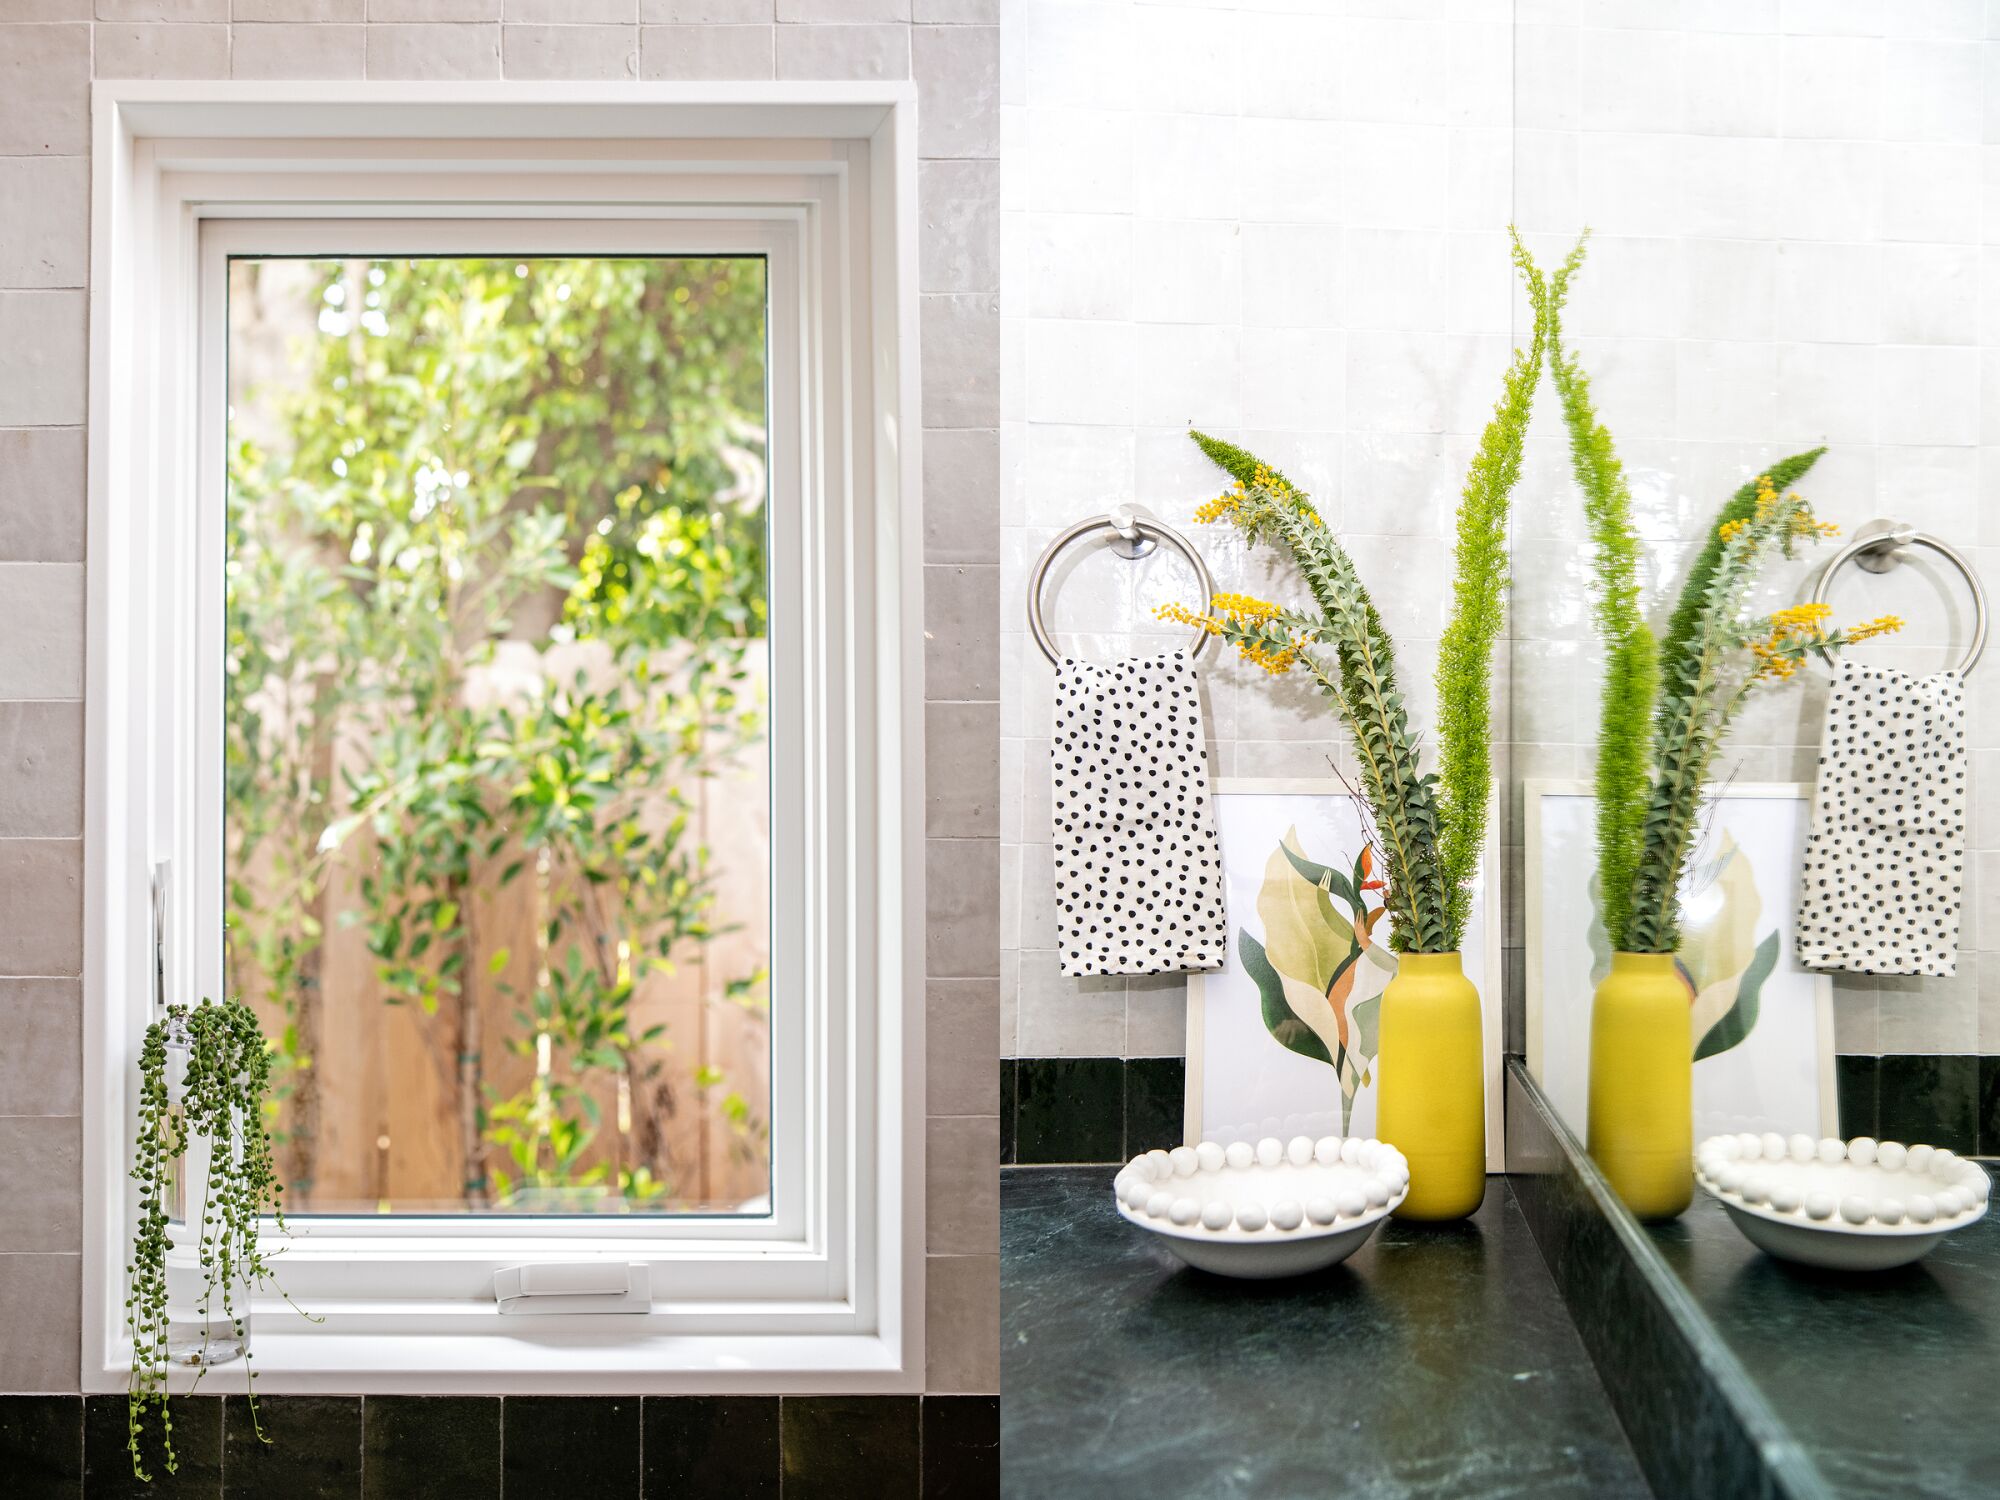 Two photos side by side showing a window against green and white tile, left, and a vase and art in a green bathroom, right.